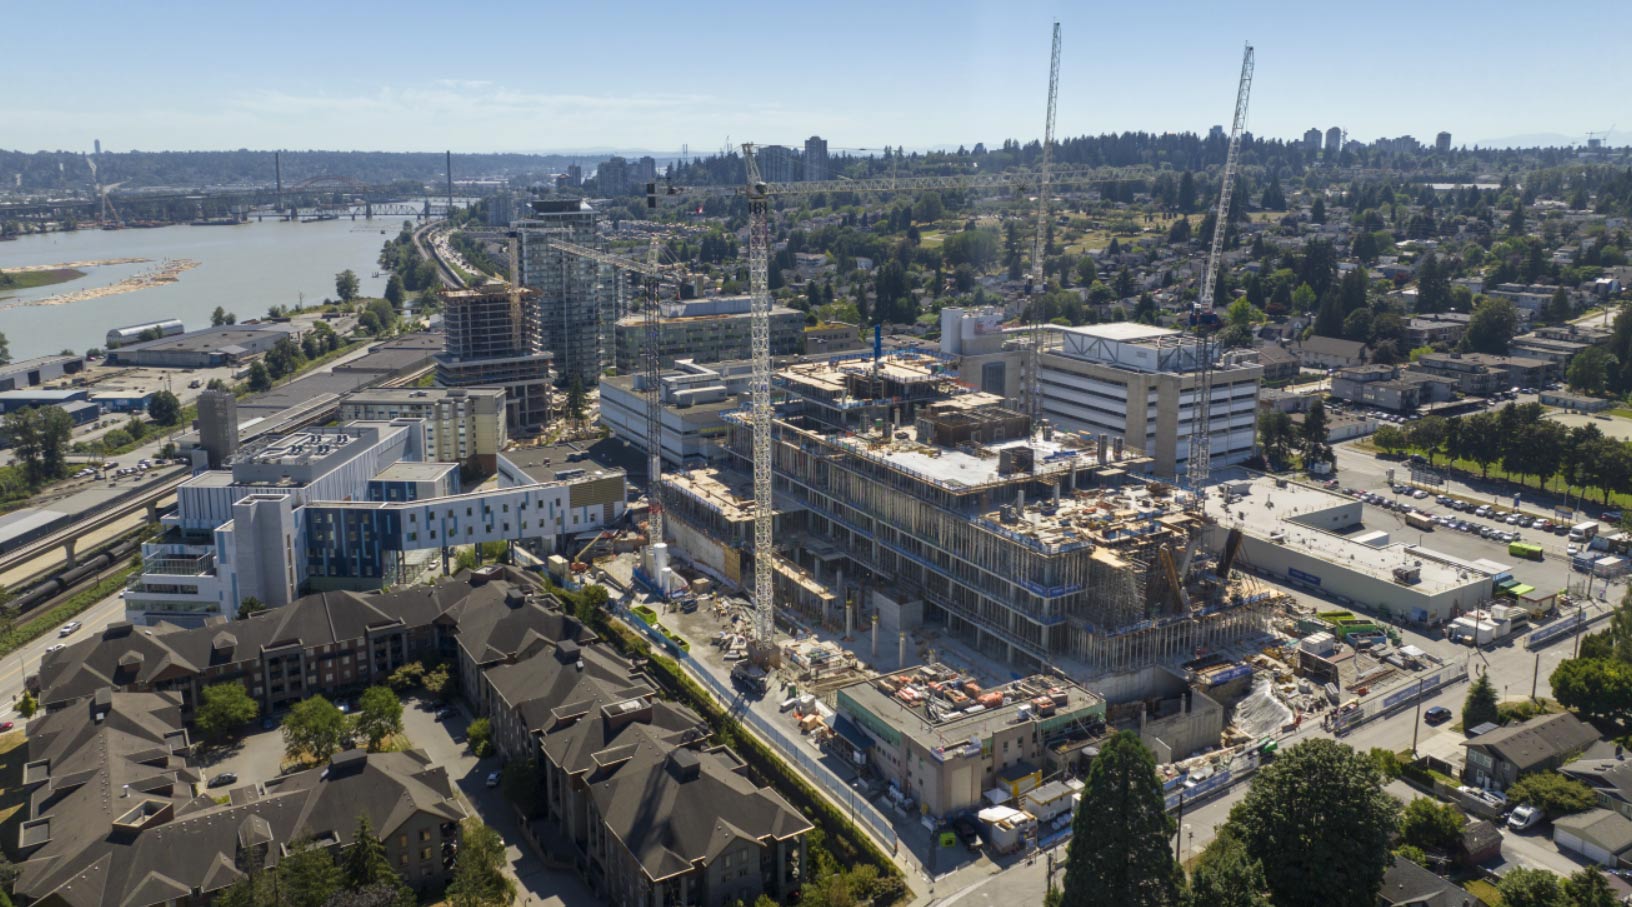 The Royal Columbian Hospital is located overlooking the Fraser River, and it is the oldest hospital in British Columbia. Phase 2 of its redevelopment will establish a 10-storey new acute care tower with 350 beds, a larger emergency department and maternity unit, more operating rooms, 350+ underground parkades, a rooftop heliport, and a new main entrance.